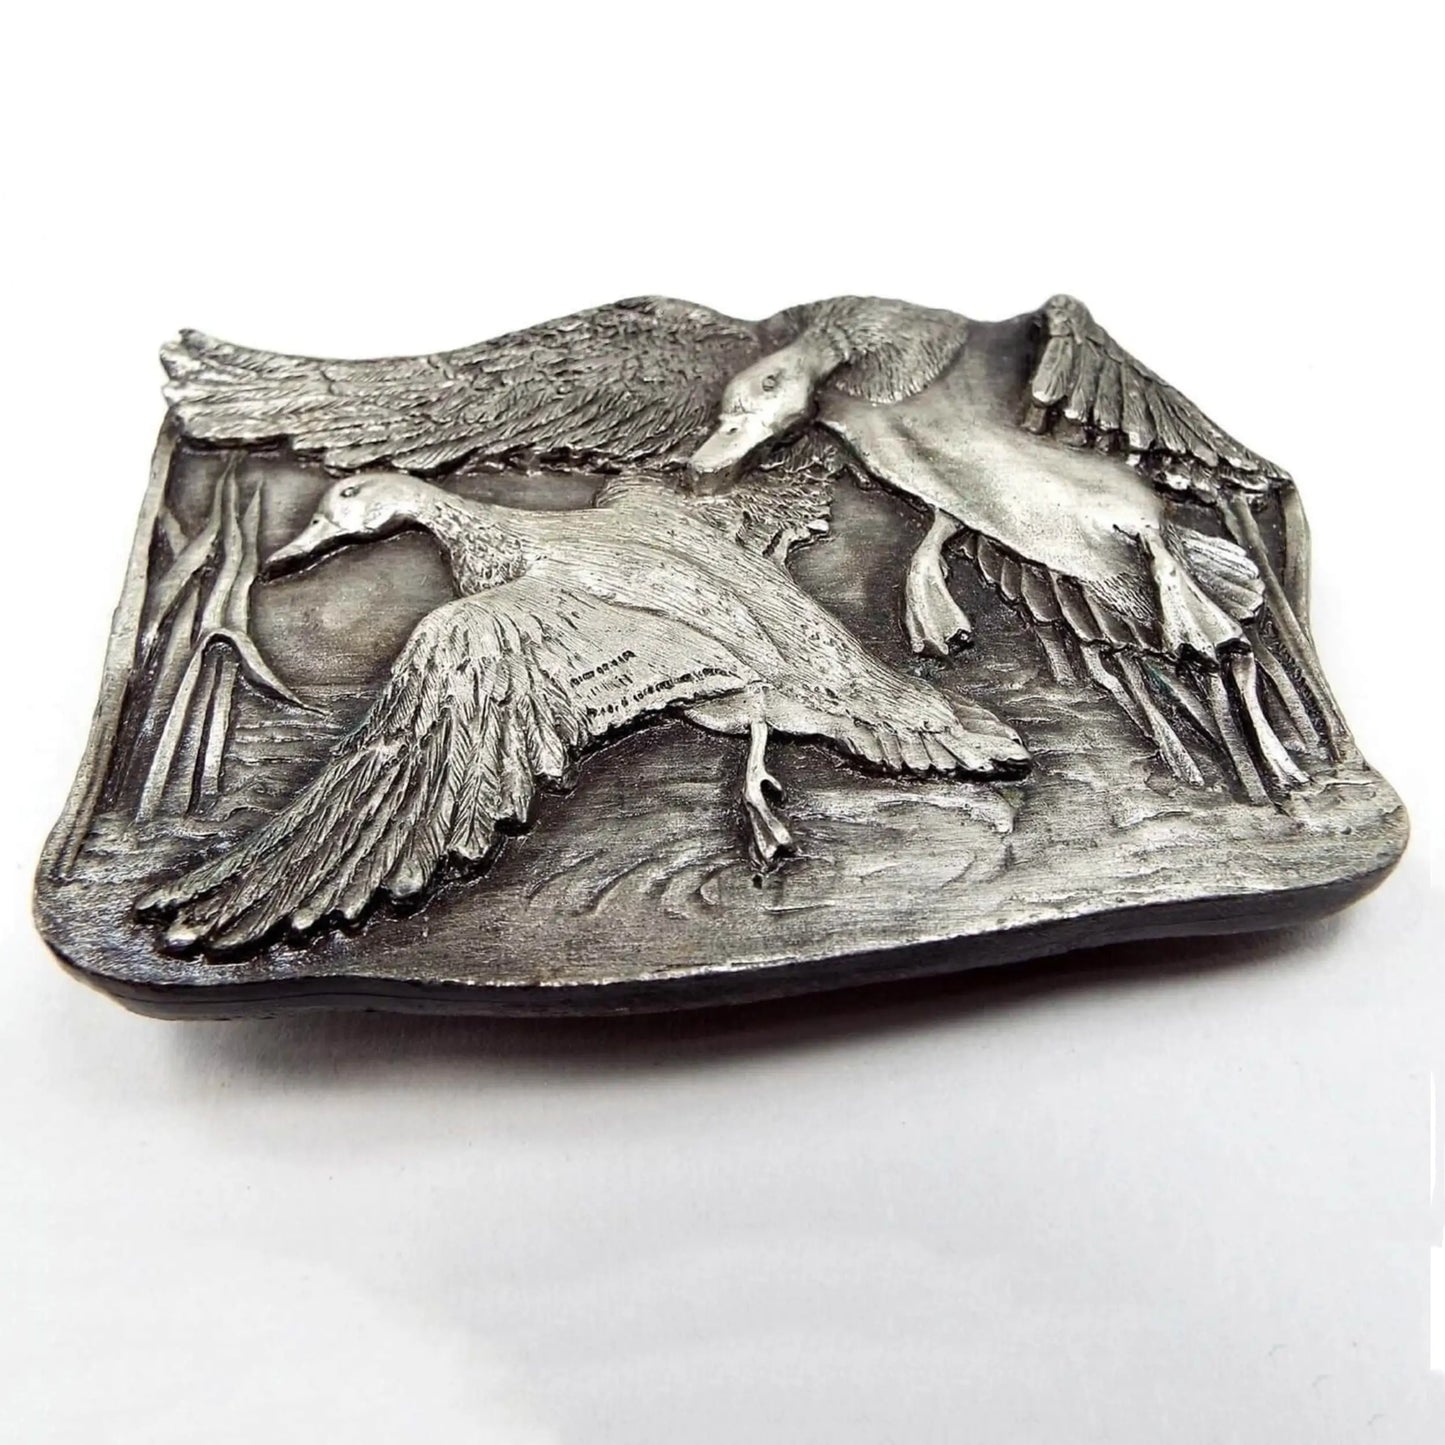 Front view of the retro vintage Bergamot Brass Works belt buckle. It depicts two flying ducks that look like they're landing on the lake. The background area has reeds and a water like design. The pewter metal of the buckle has various shades of dark and light gray and has a detailed raised 3D like design.